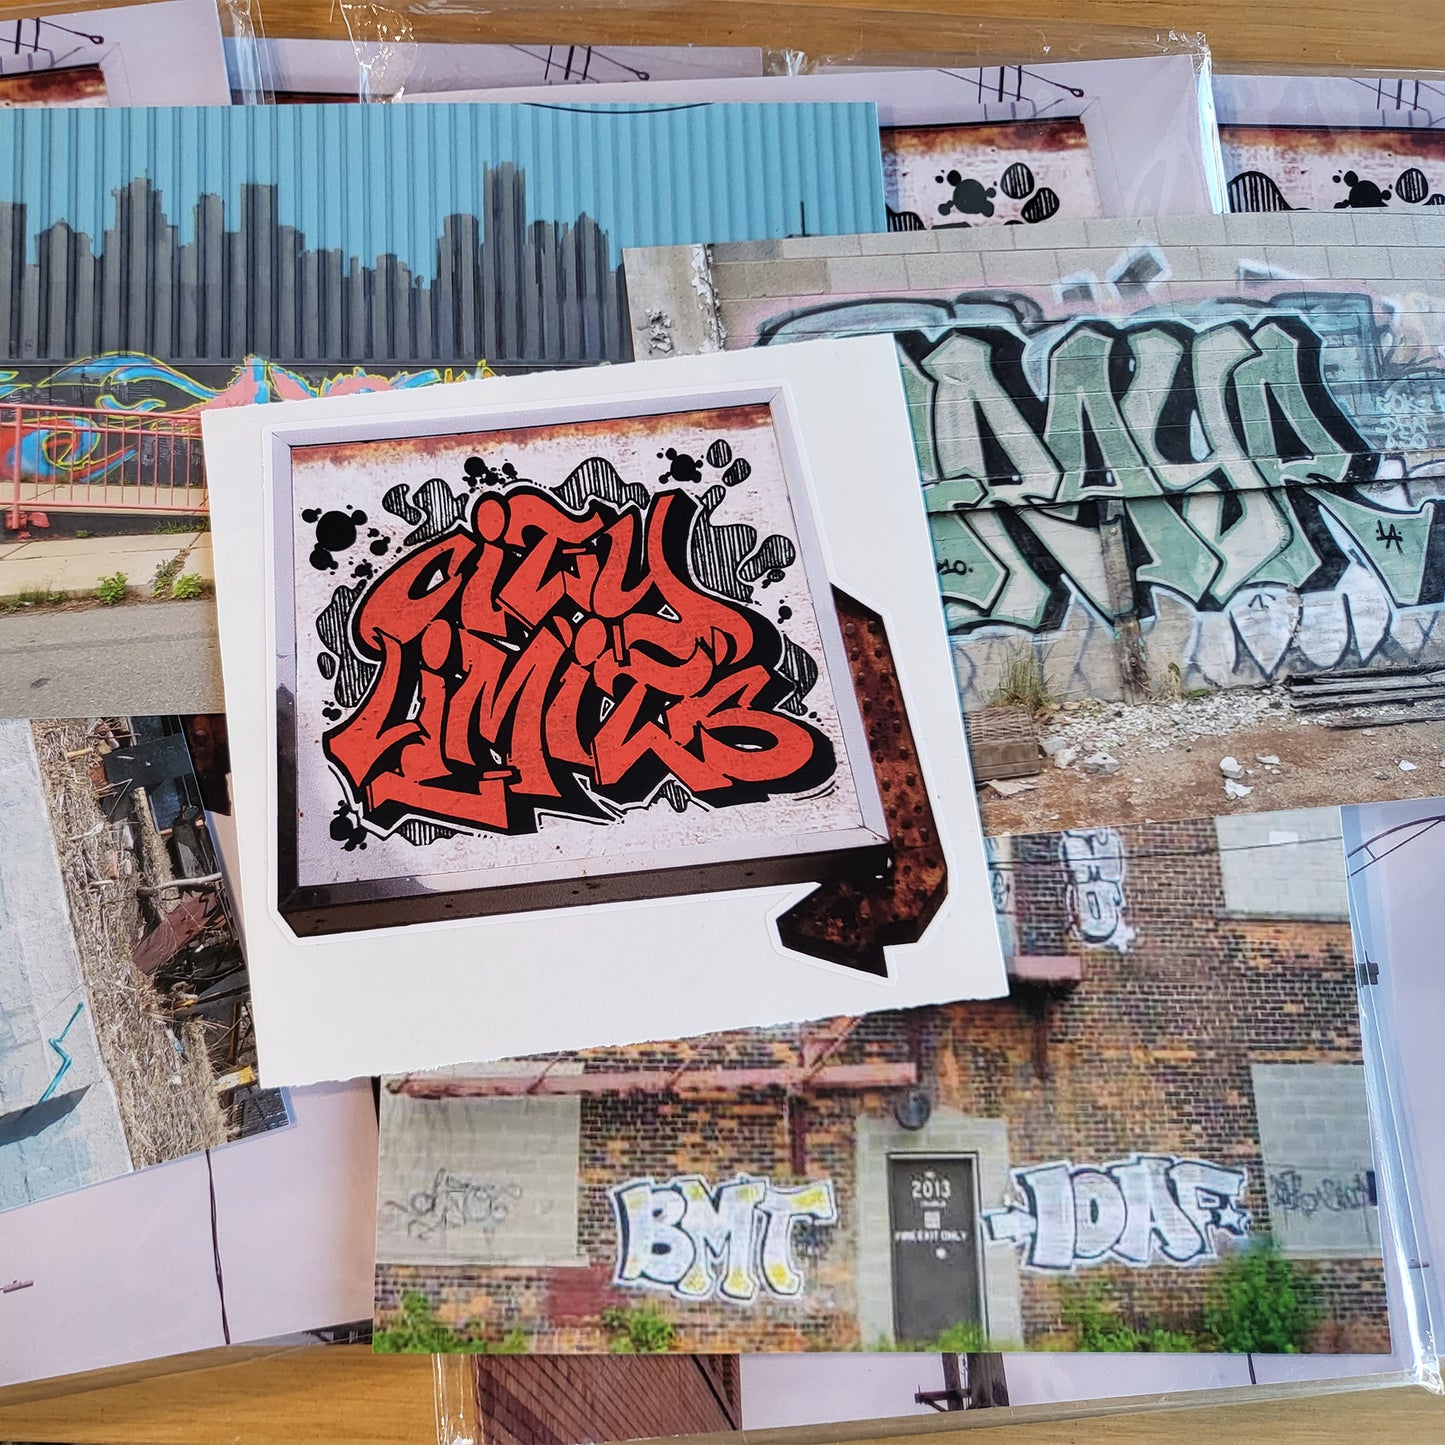 A grouping of small magazines wrapped in plastic behind photo copies of graffiti pieces from various artists with a sticker on top of the pile reading ' City Limits' written in red graffiti style letters, pasted on a cropped out photo of an old backlit sign with a rusted arrow at the right side